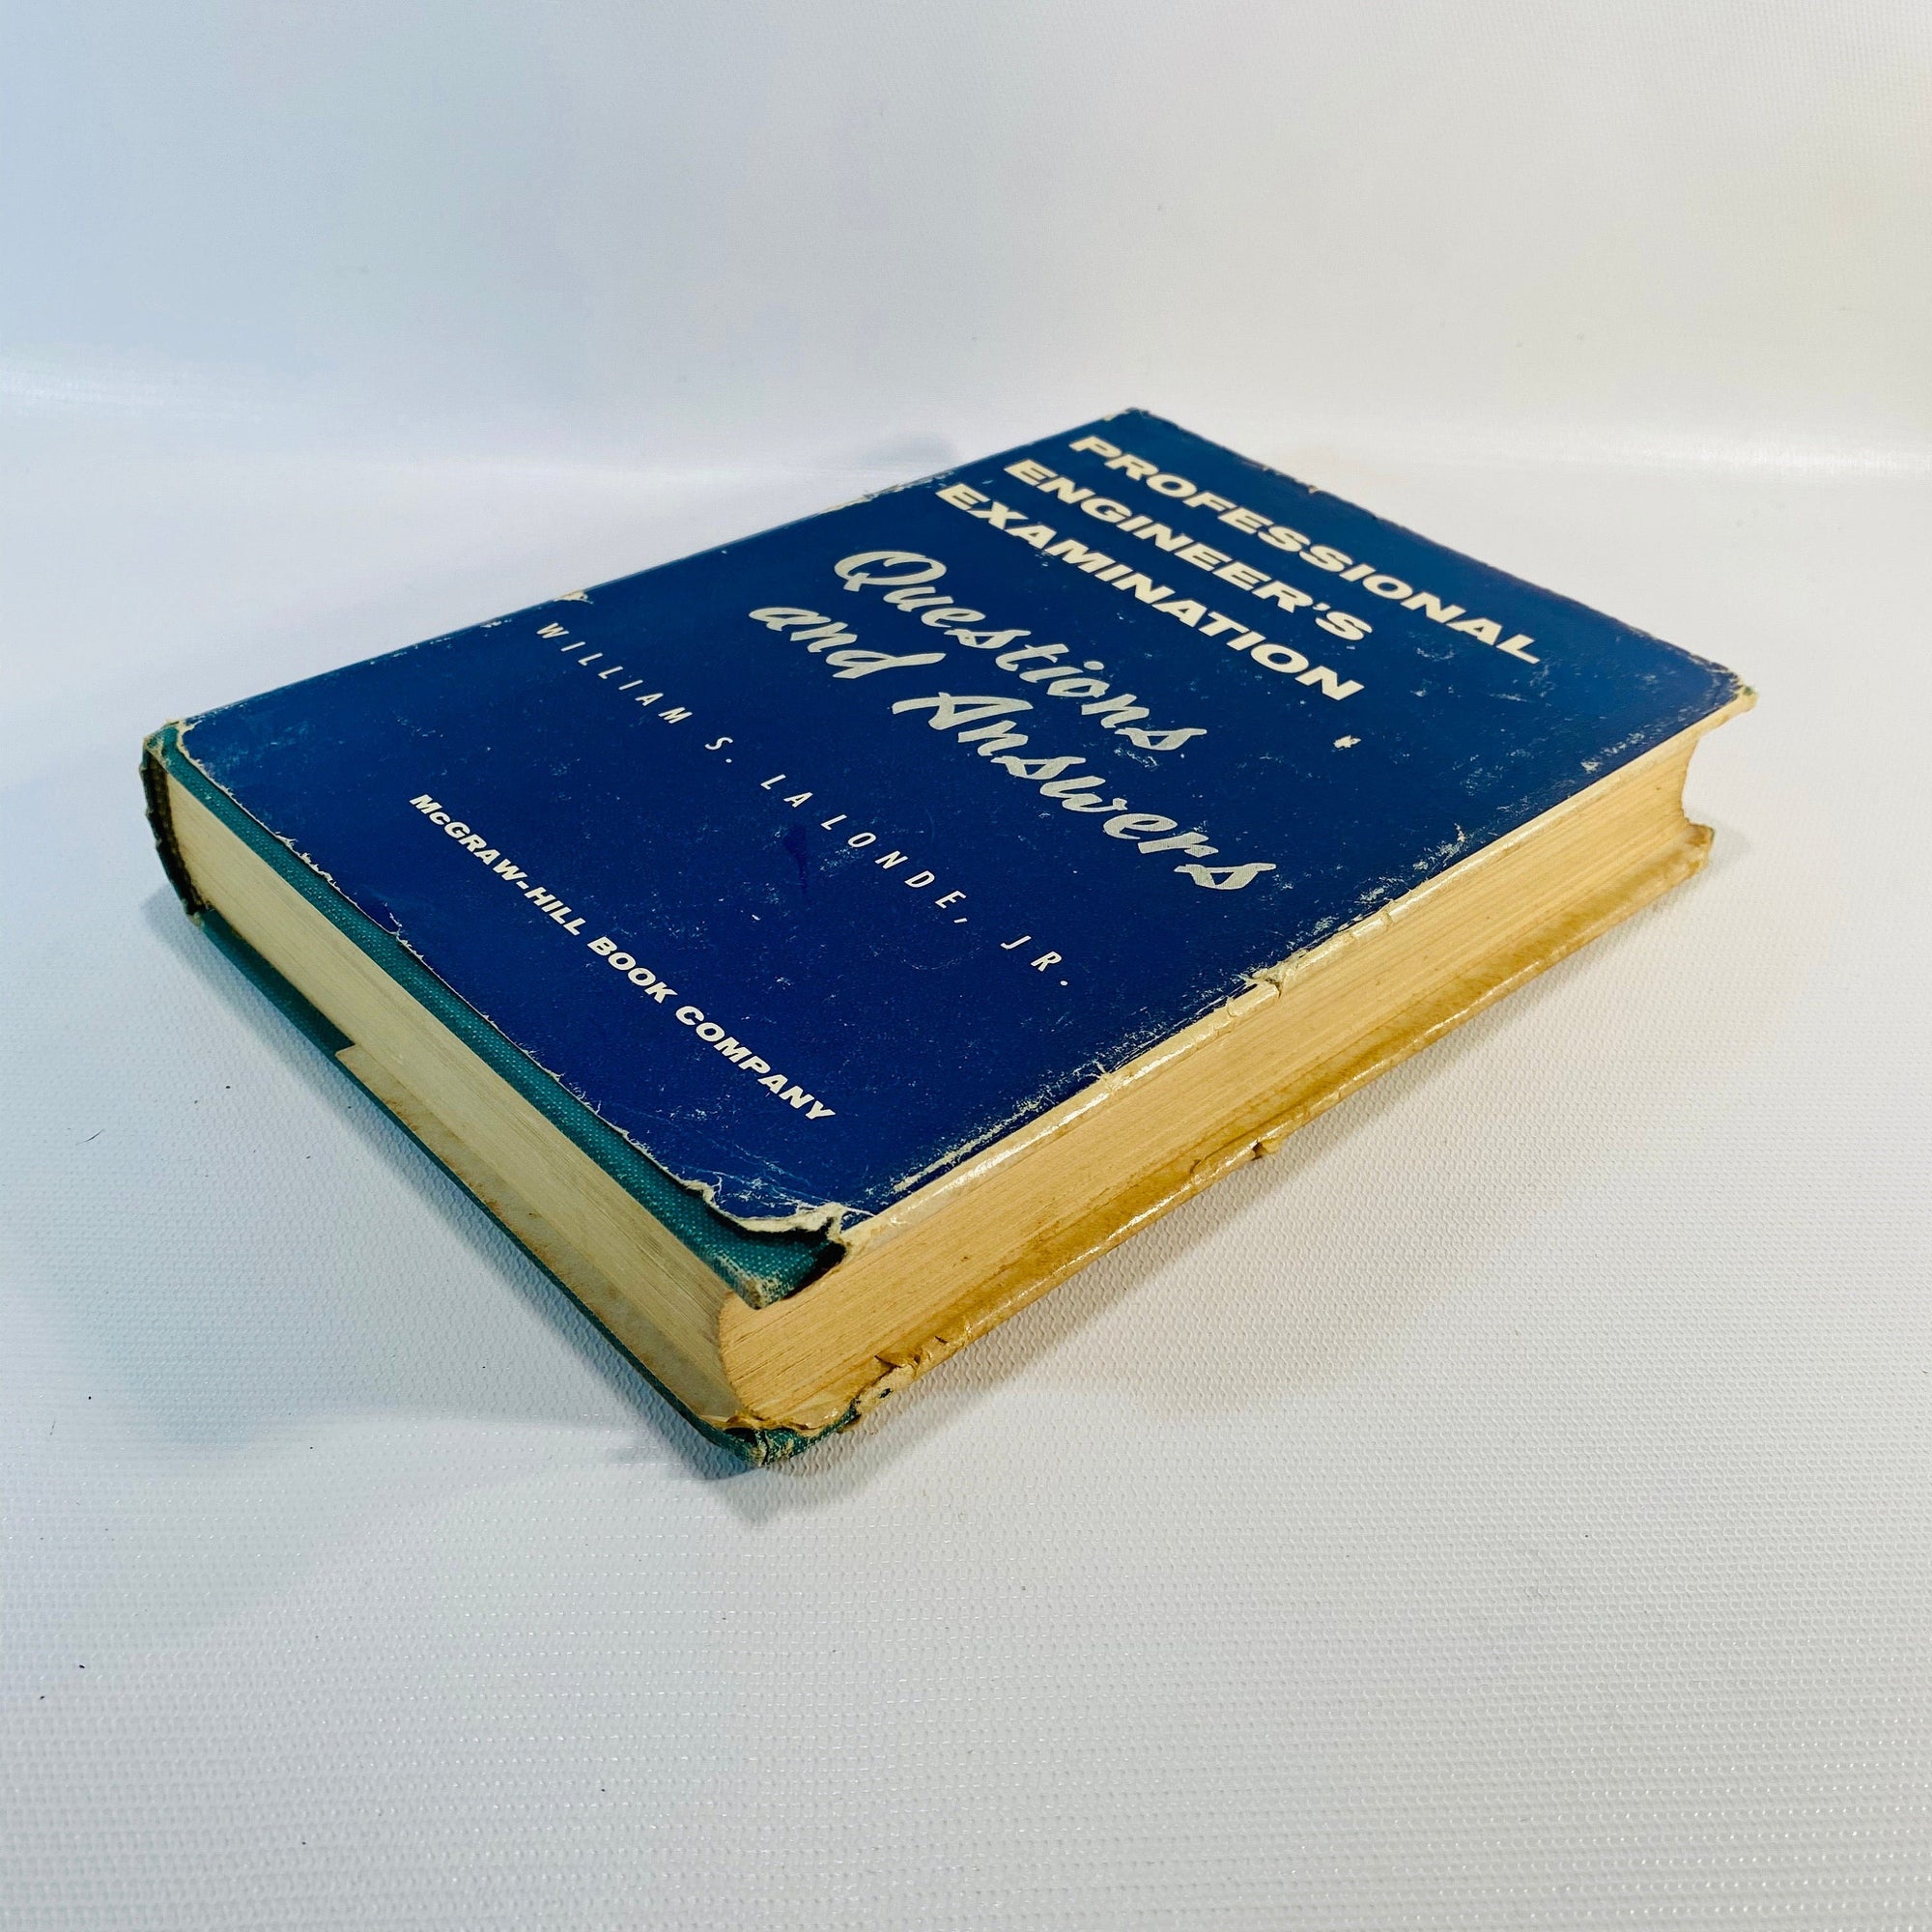 Professional Engineer's Examination Questions & Answers by William LaLonde Jr 1956